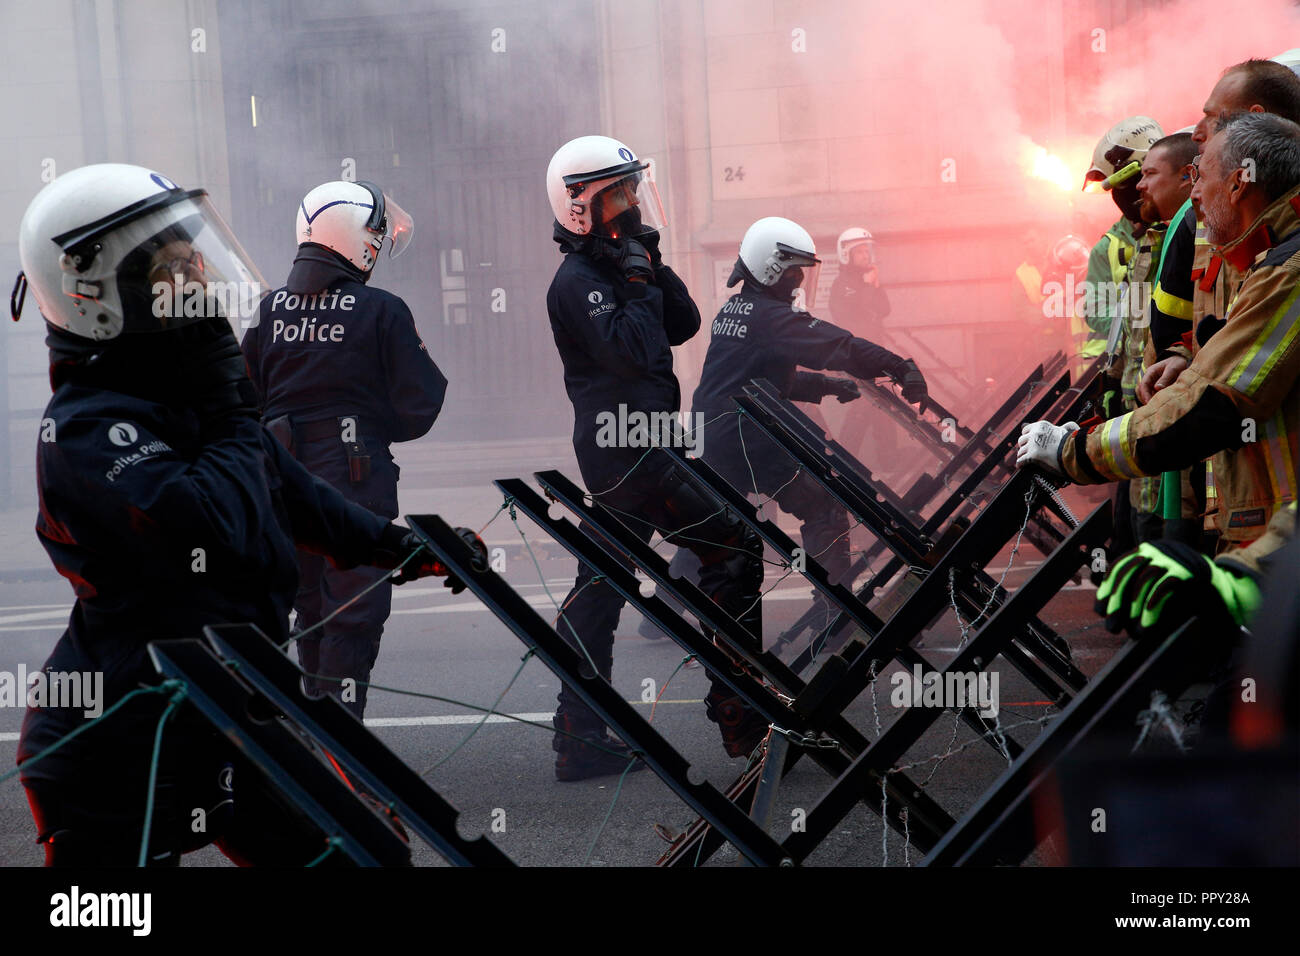 Brussels, Belgium. 28th Sep. 2018. Firefighters and workers from public sector scuffle with riot police during a protest against planned pension reforms. Alexandros Michailidis/Alamy Live News Stock Photo